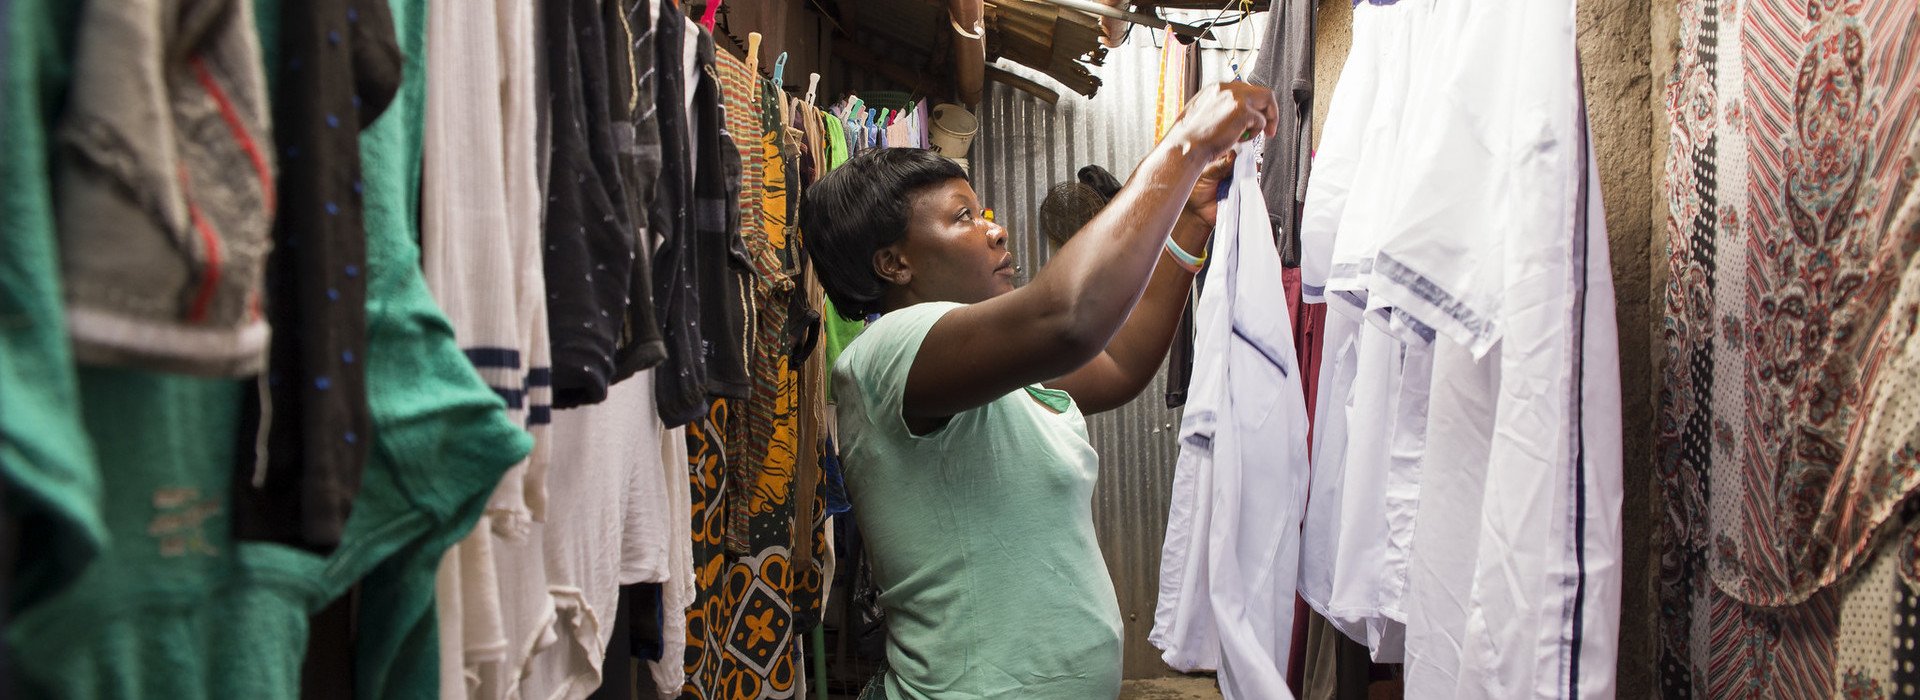 Women make up two-thirds of the paid ‘care workforce’. (Photo: Katie G. Nelson/Oxfam)